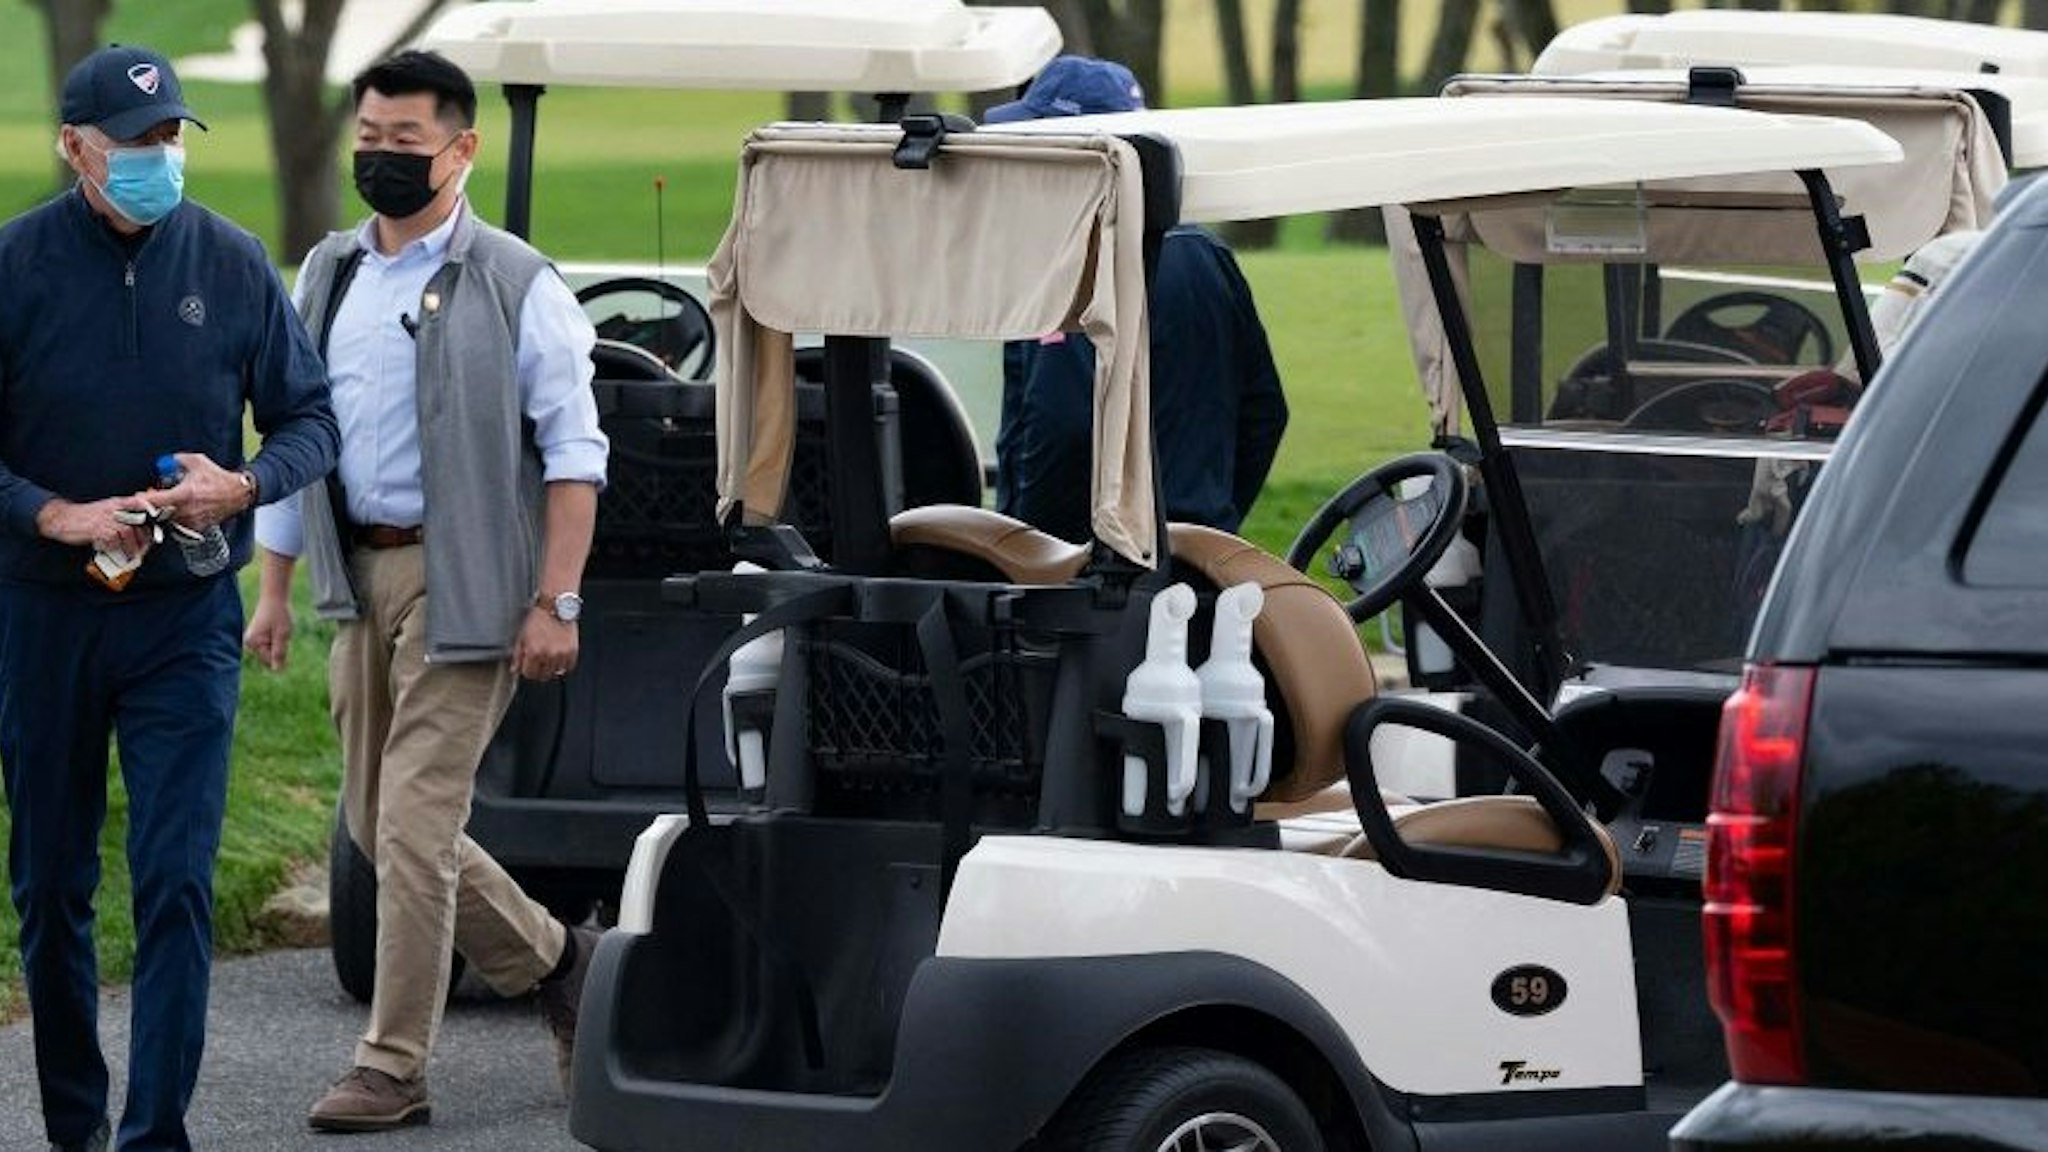 US President Joe Biden leaves his cart after a round of golf at Wilmington Country Club in Wilmington, Delaware, on April 17, 2021. - President Joe Biden played golf for the first time in his presidency Saturday, hitting the fairways in his home city of Wilmington. (Photo by JIM WATSON / AFP) (Photo by